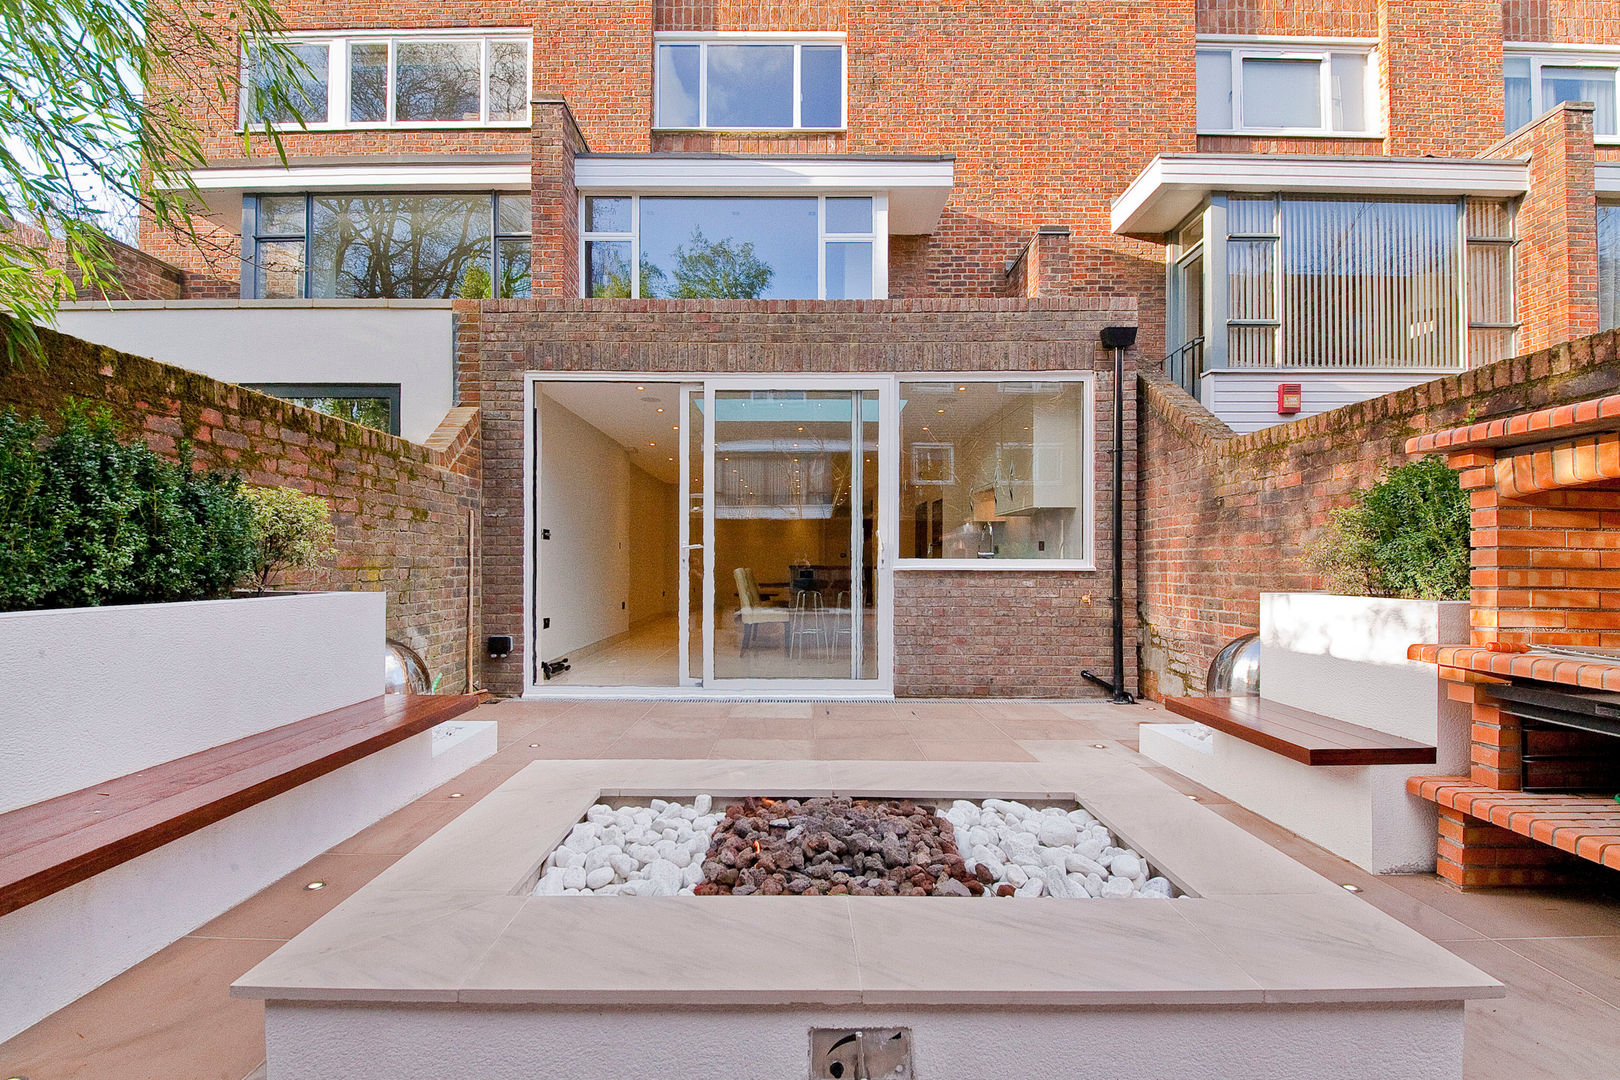 Private House - Holland Park , New Images Architects New Images Architects بلكونة أو شرفة